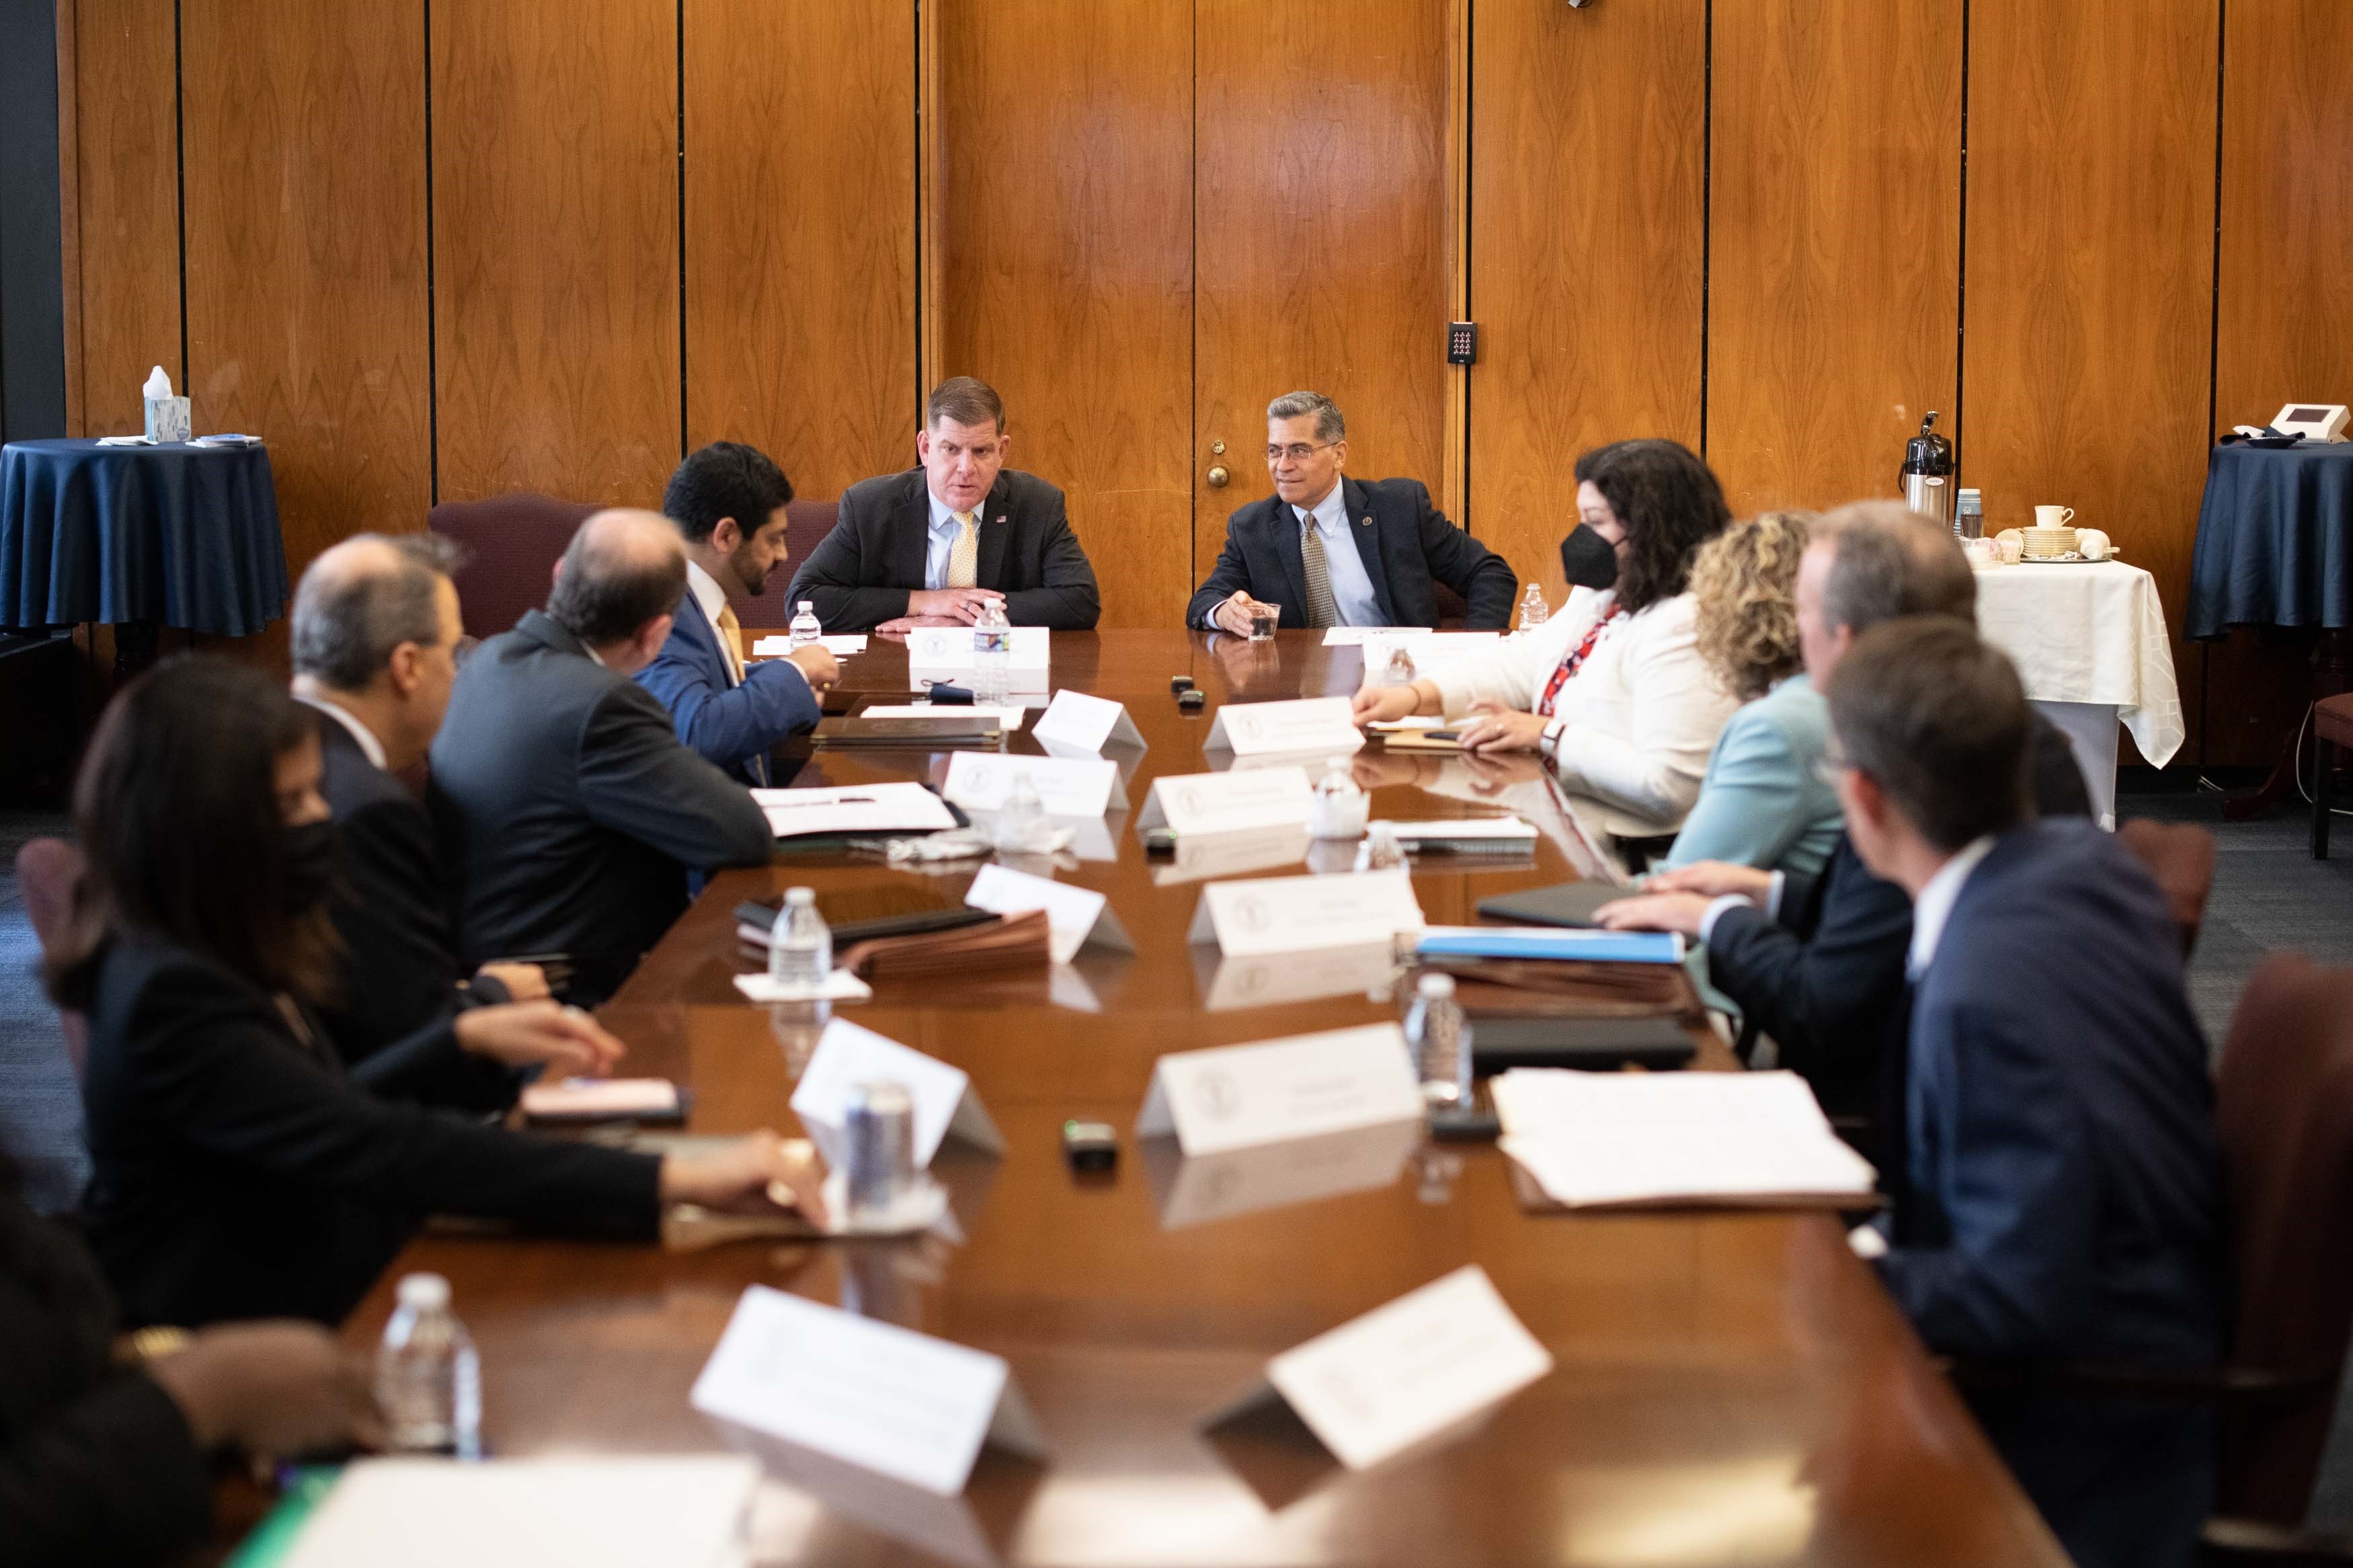 Secretary of Health and Human Services Xavier Becerra (right) and Secretary of Labor Marty Walsh (left) at conference room table with health insurance and business leaders to discuss mental health parity laws in Washington on May 3, 2022